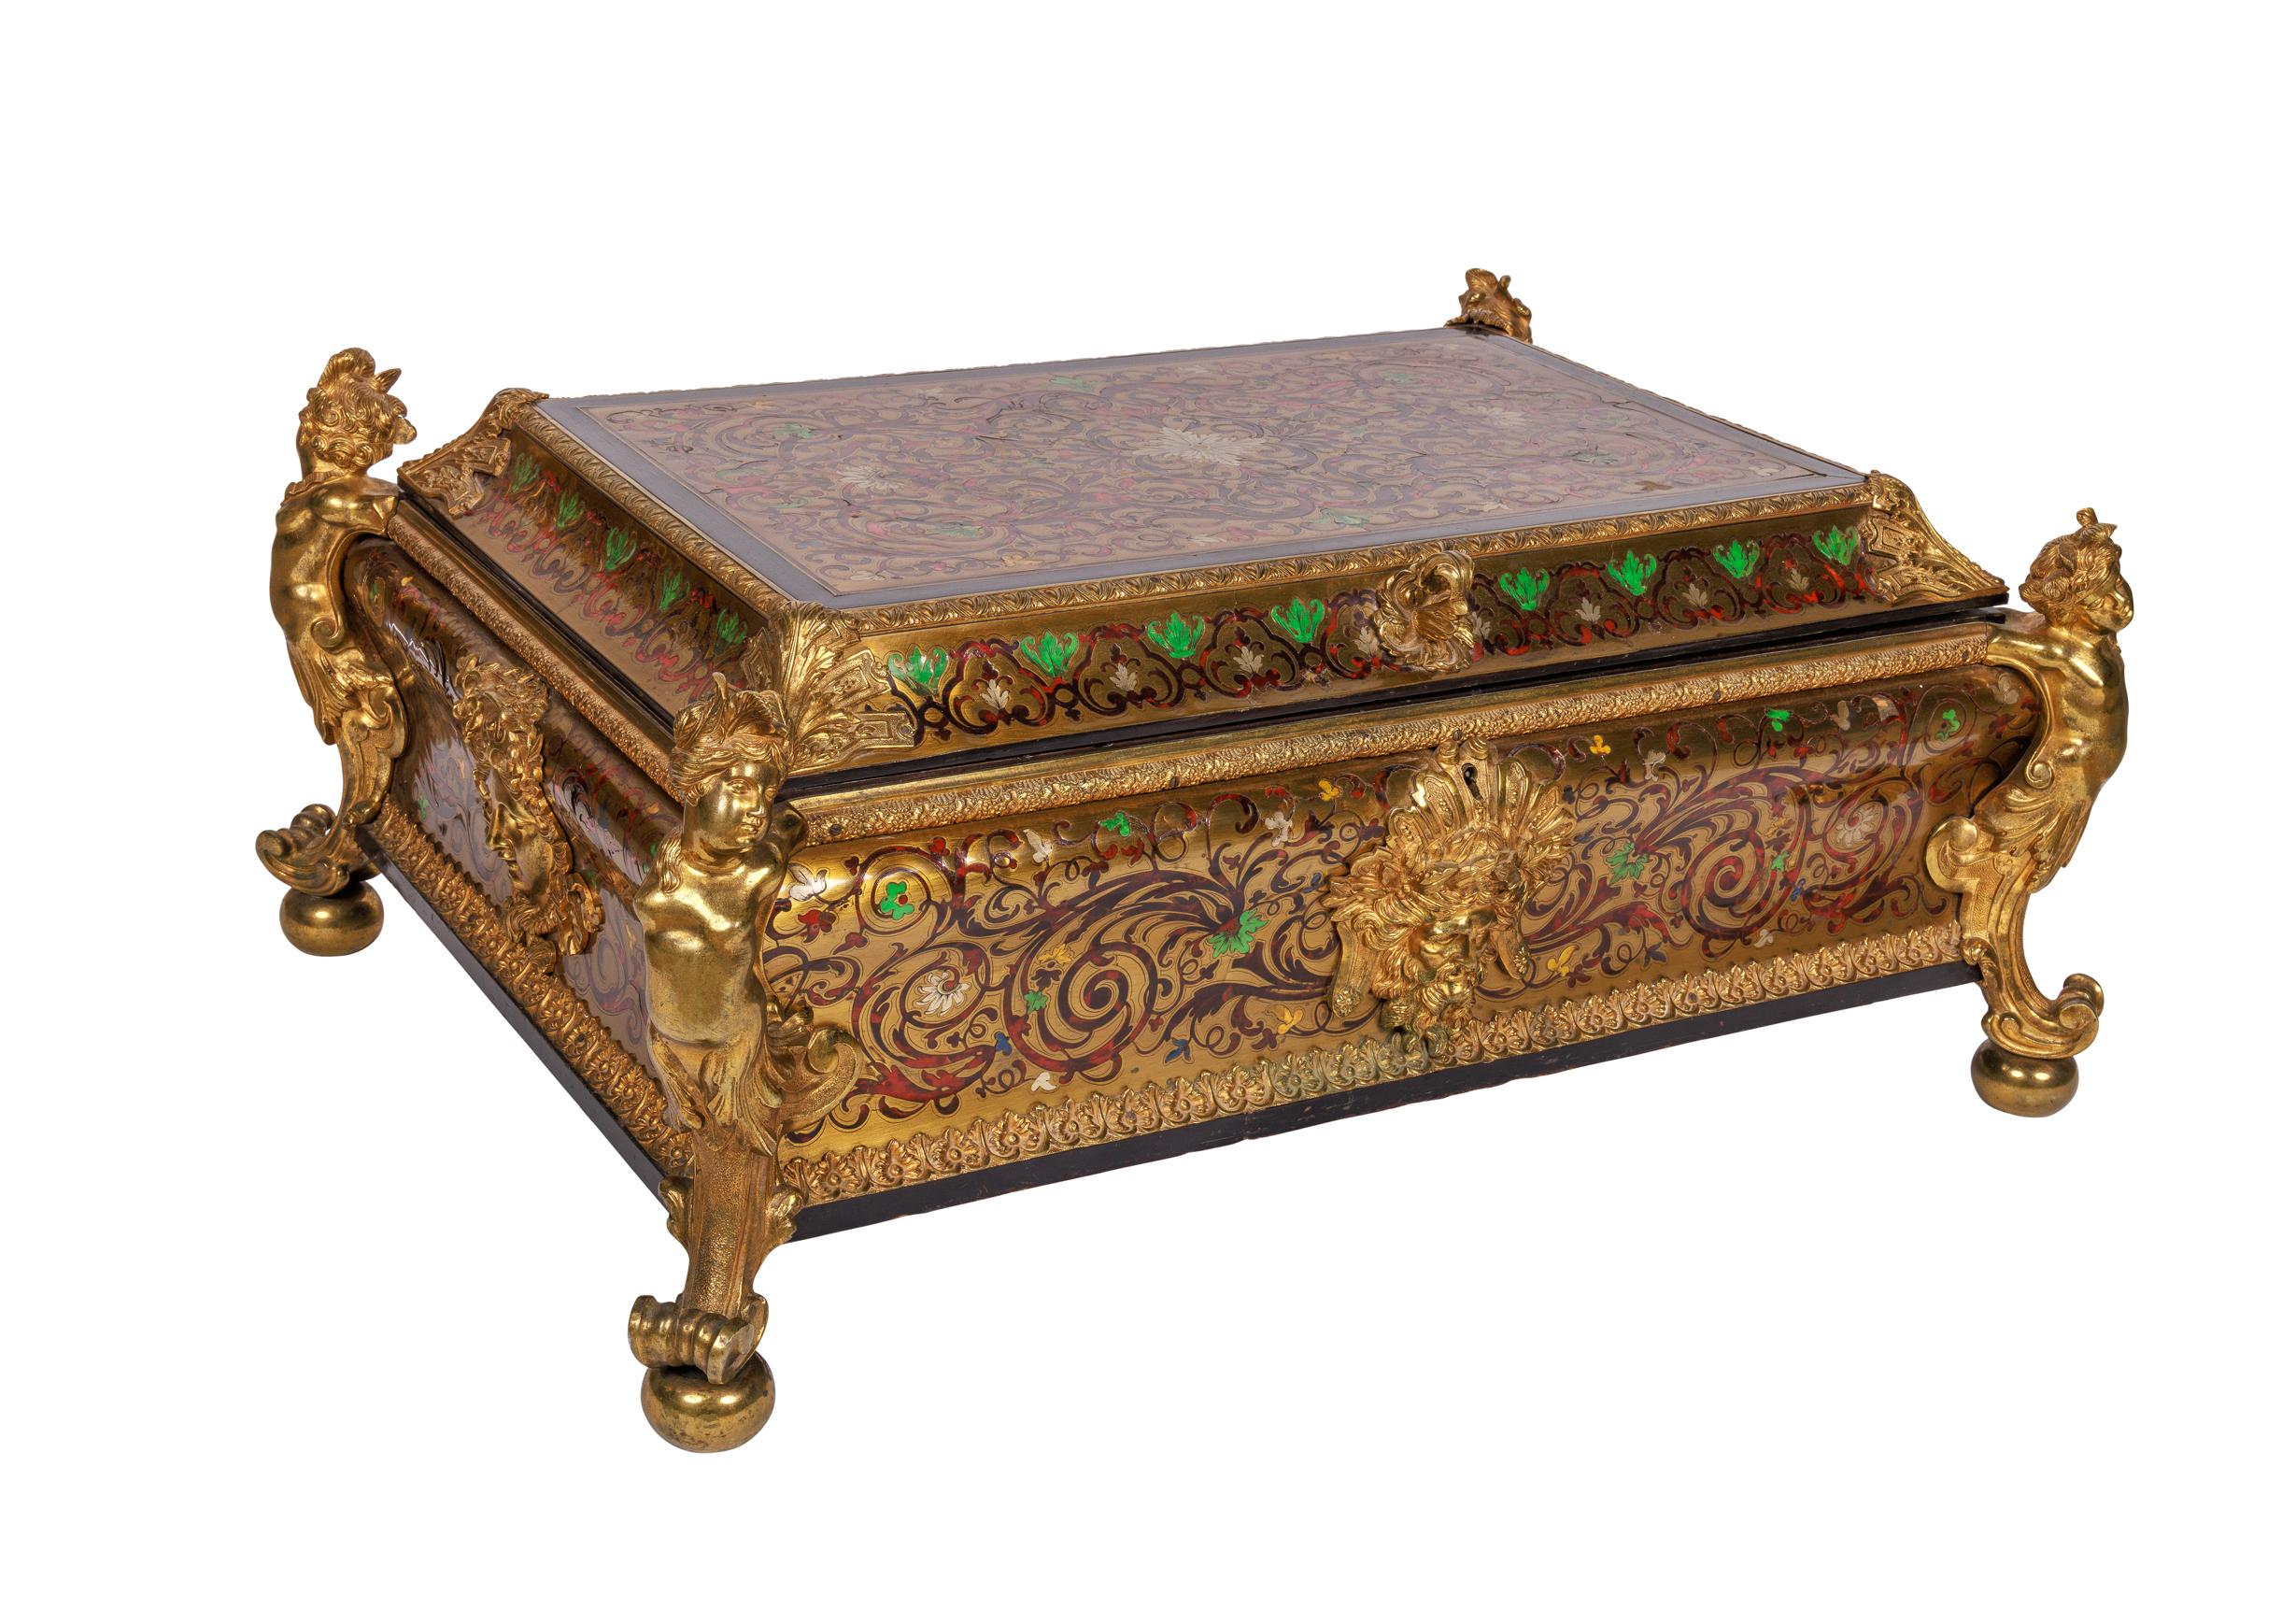 Brass Monumental Louis XIV Style Gilt-Bronze Mounted Boulle Marquetry Casket Box For Sale